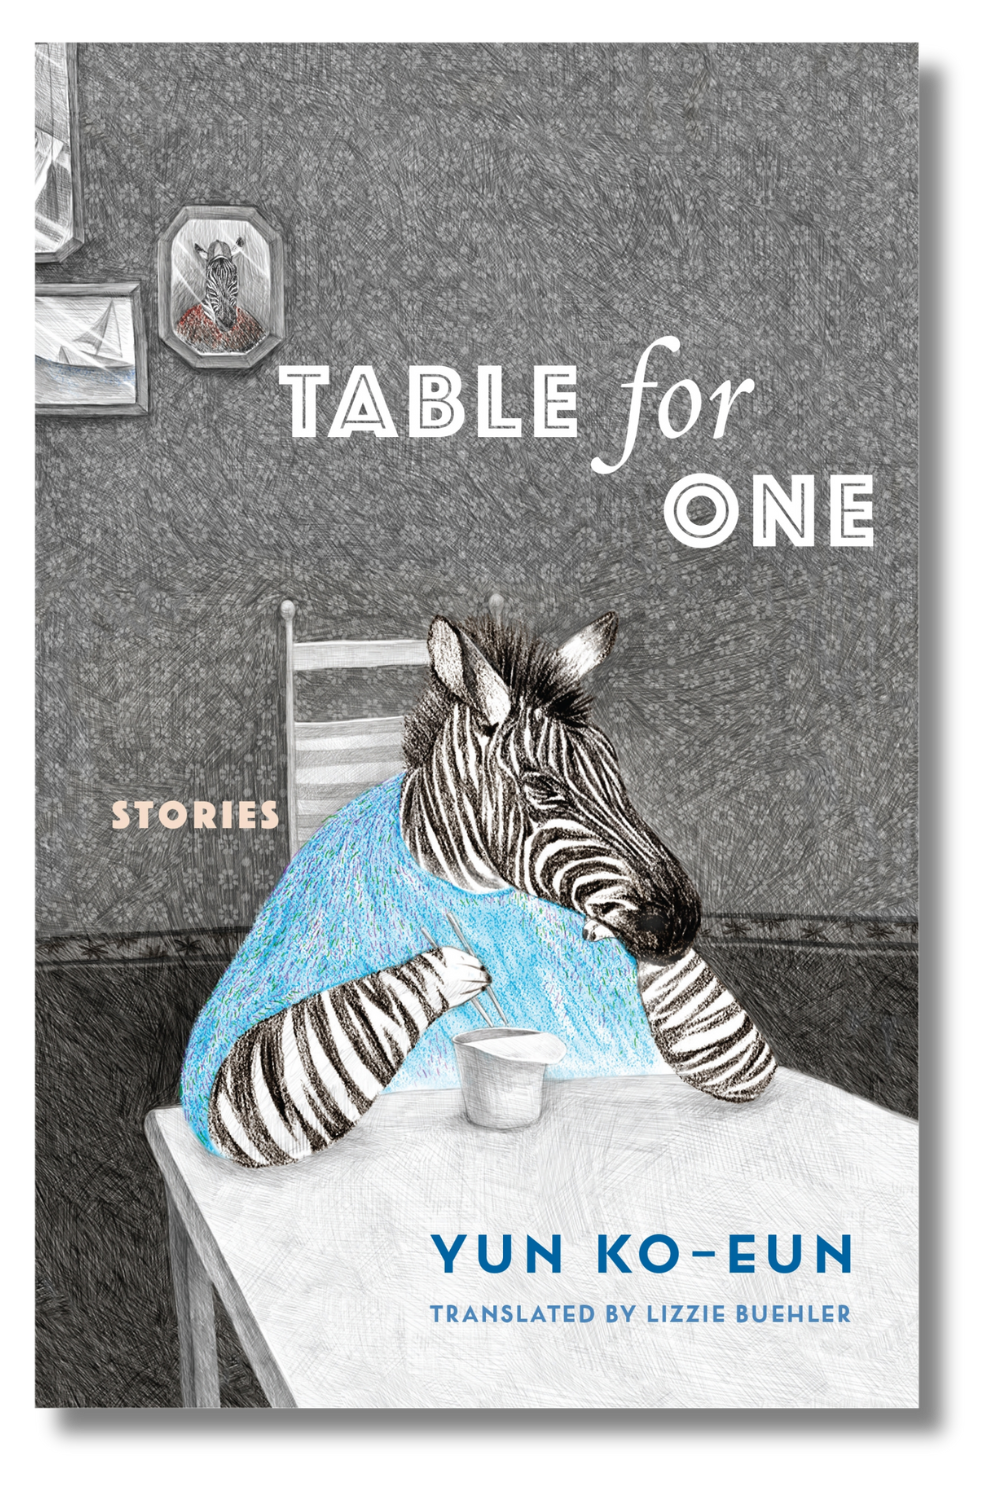 The cover of "Table for One" by Yun Ko-Eun, tr. by Lizzie Buehler